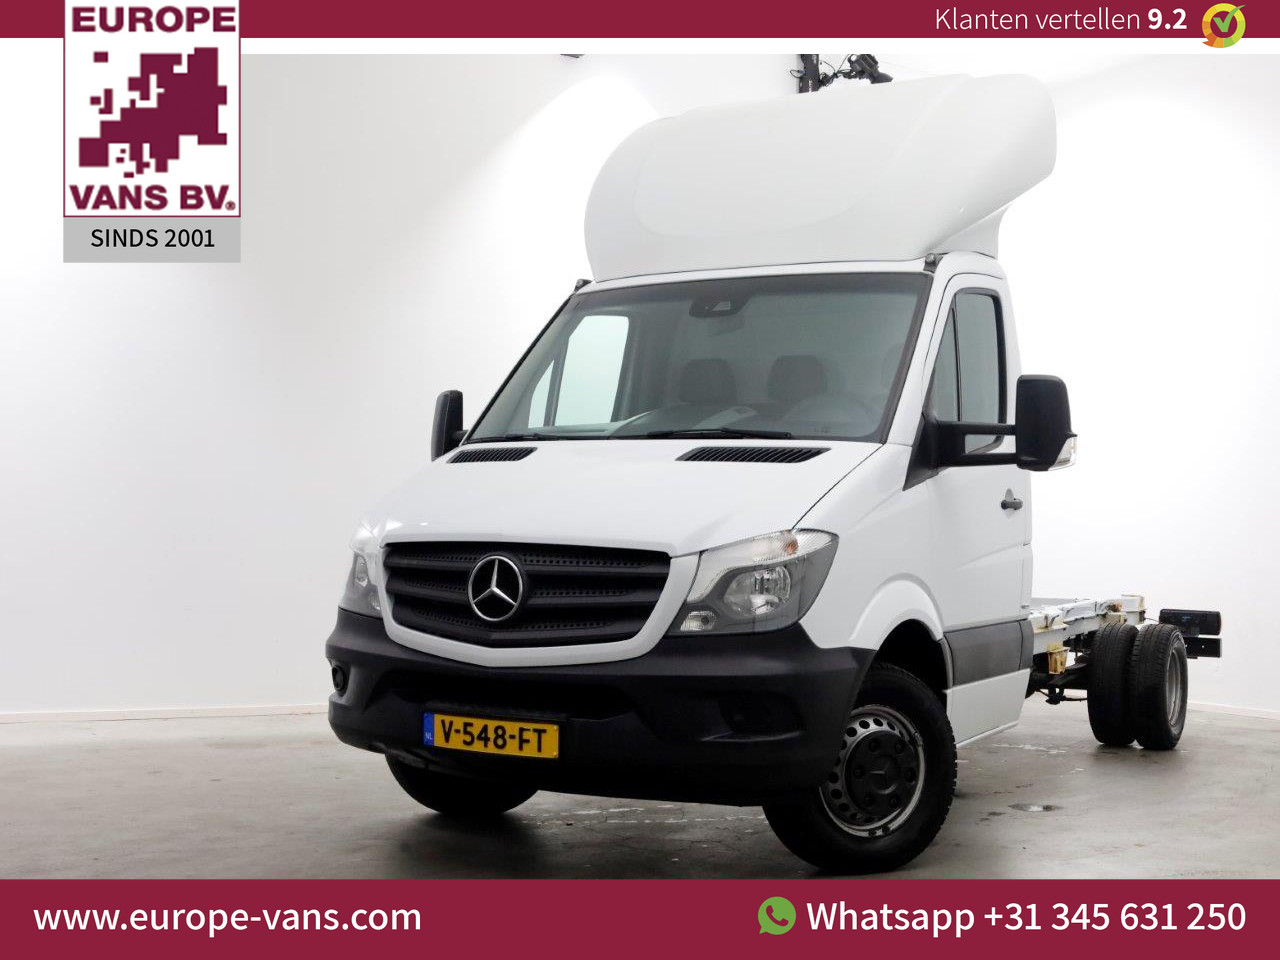 Mercedes-Benz Sprinter 519 CDI 3.0 V6 190pk Euro6 Maxi Chassis Cabine/Fahrgestell WB432 04-2017